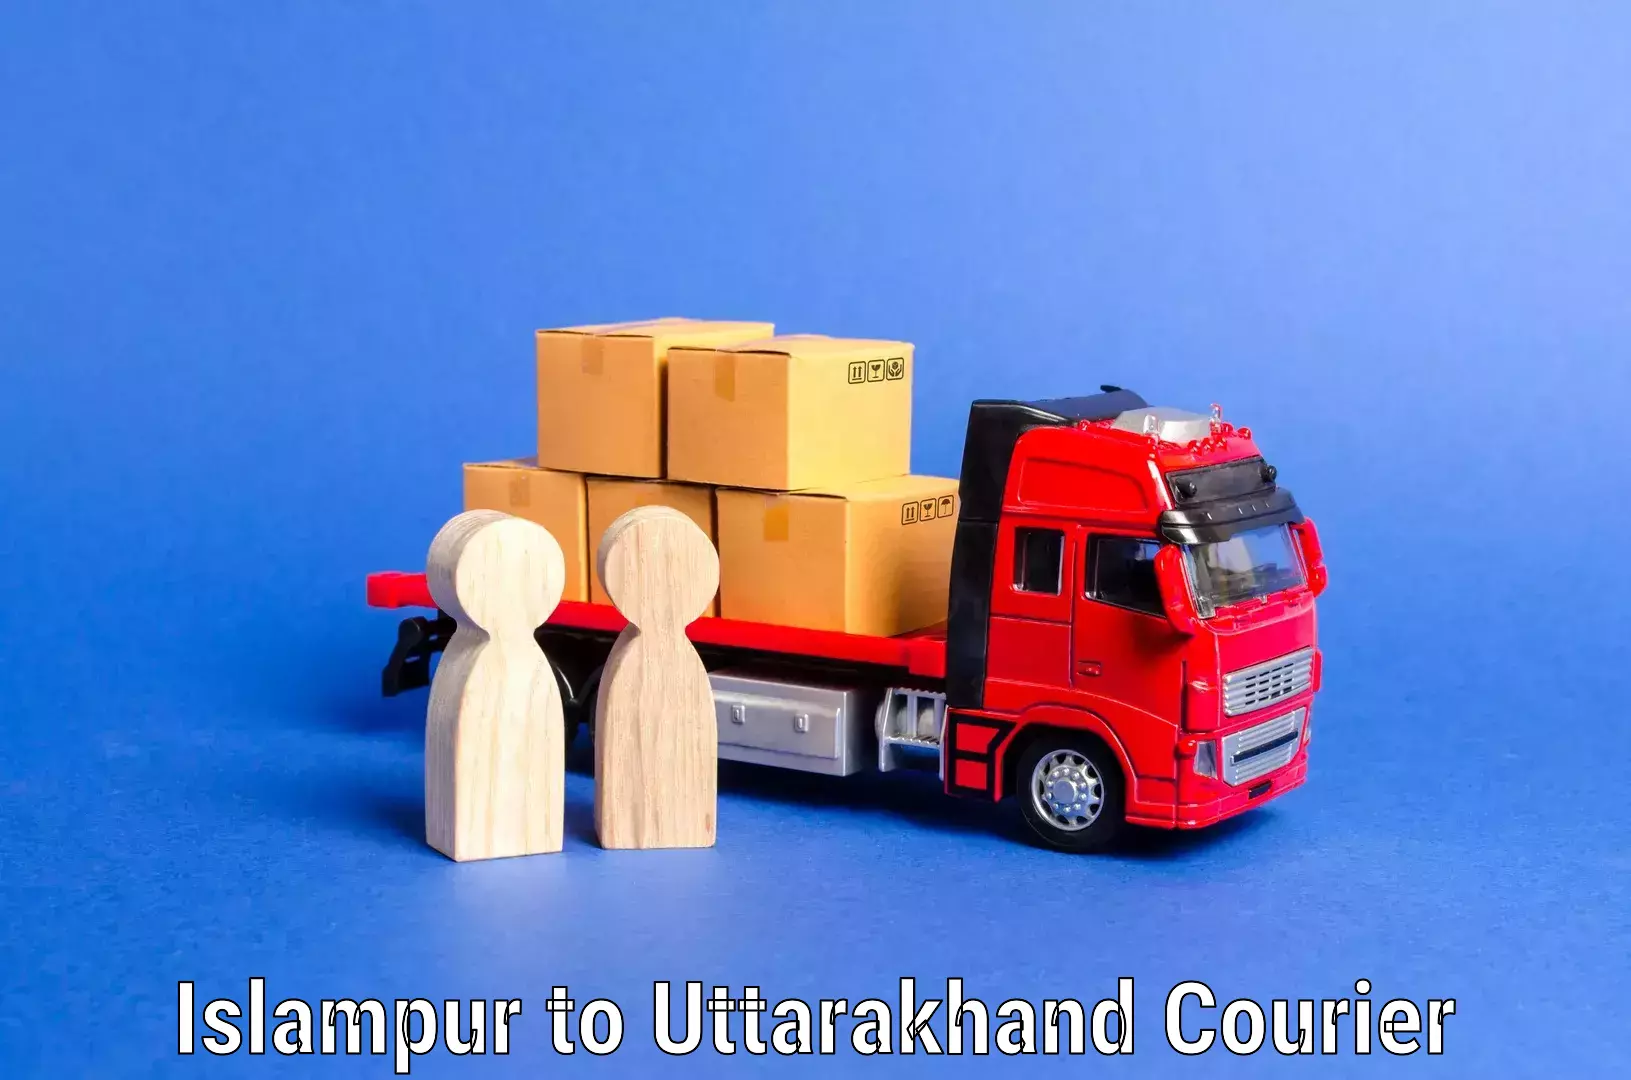 Furniture delivery service Islampur to Uttarakhand